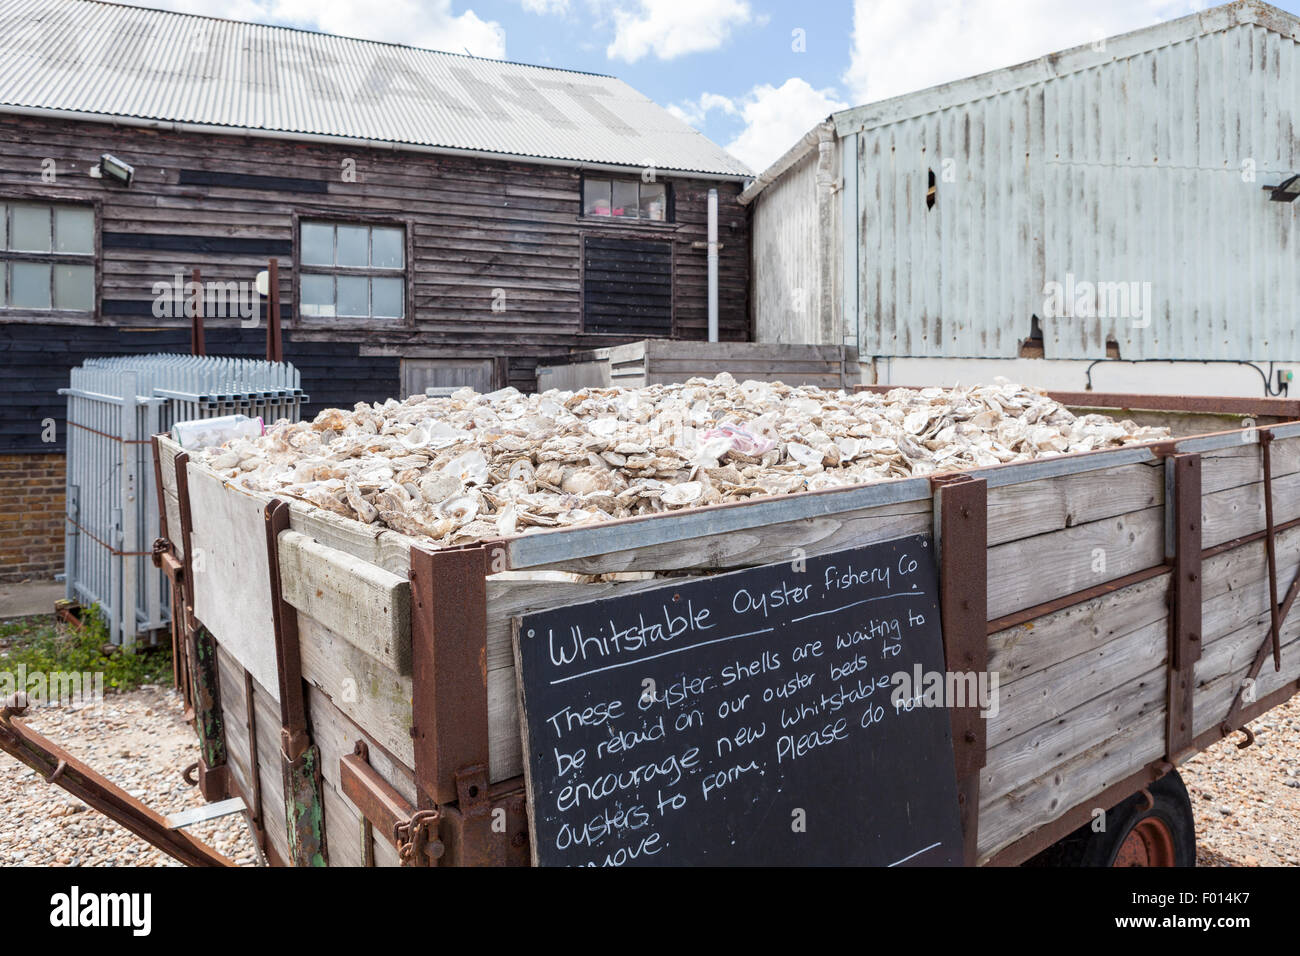 Discarded oyster shells, Whitstable, Kent, England Stock Photo